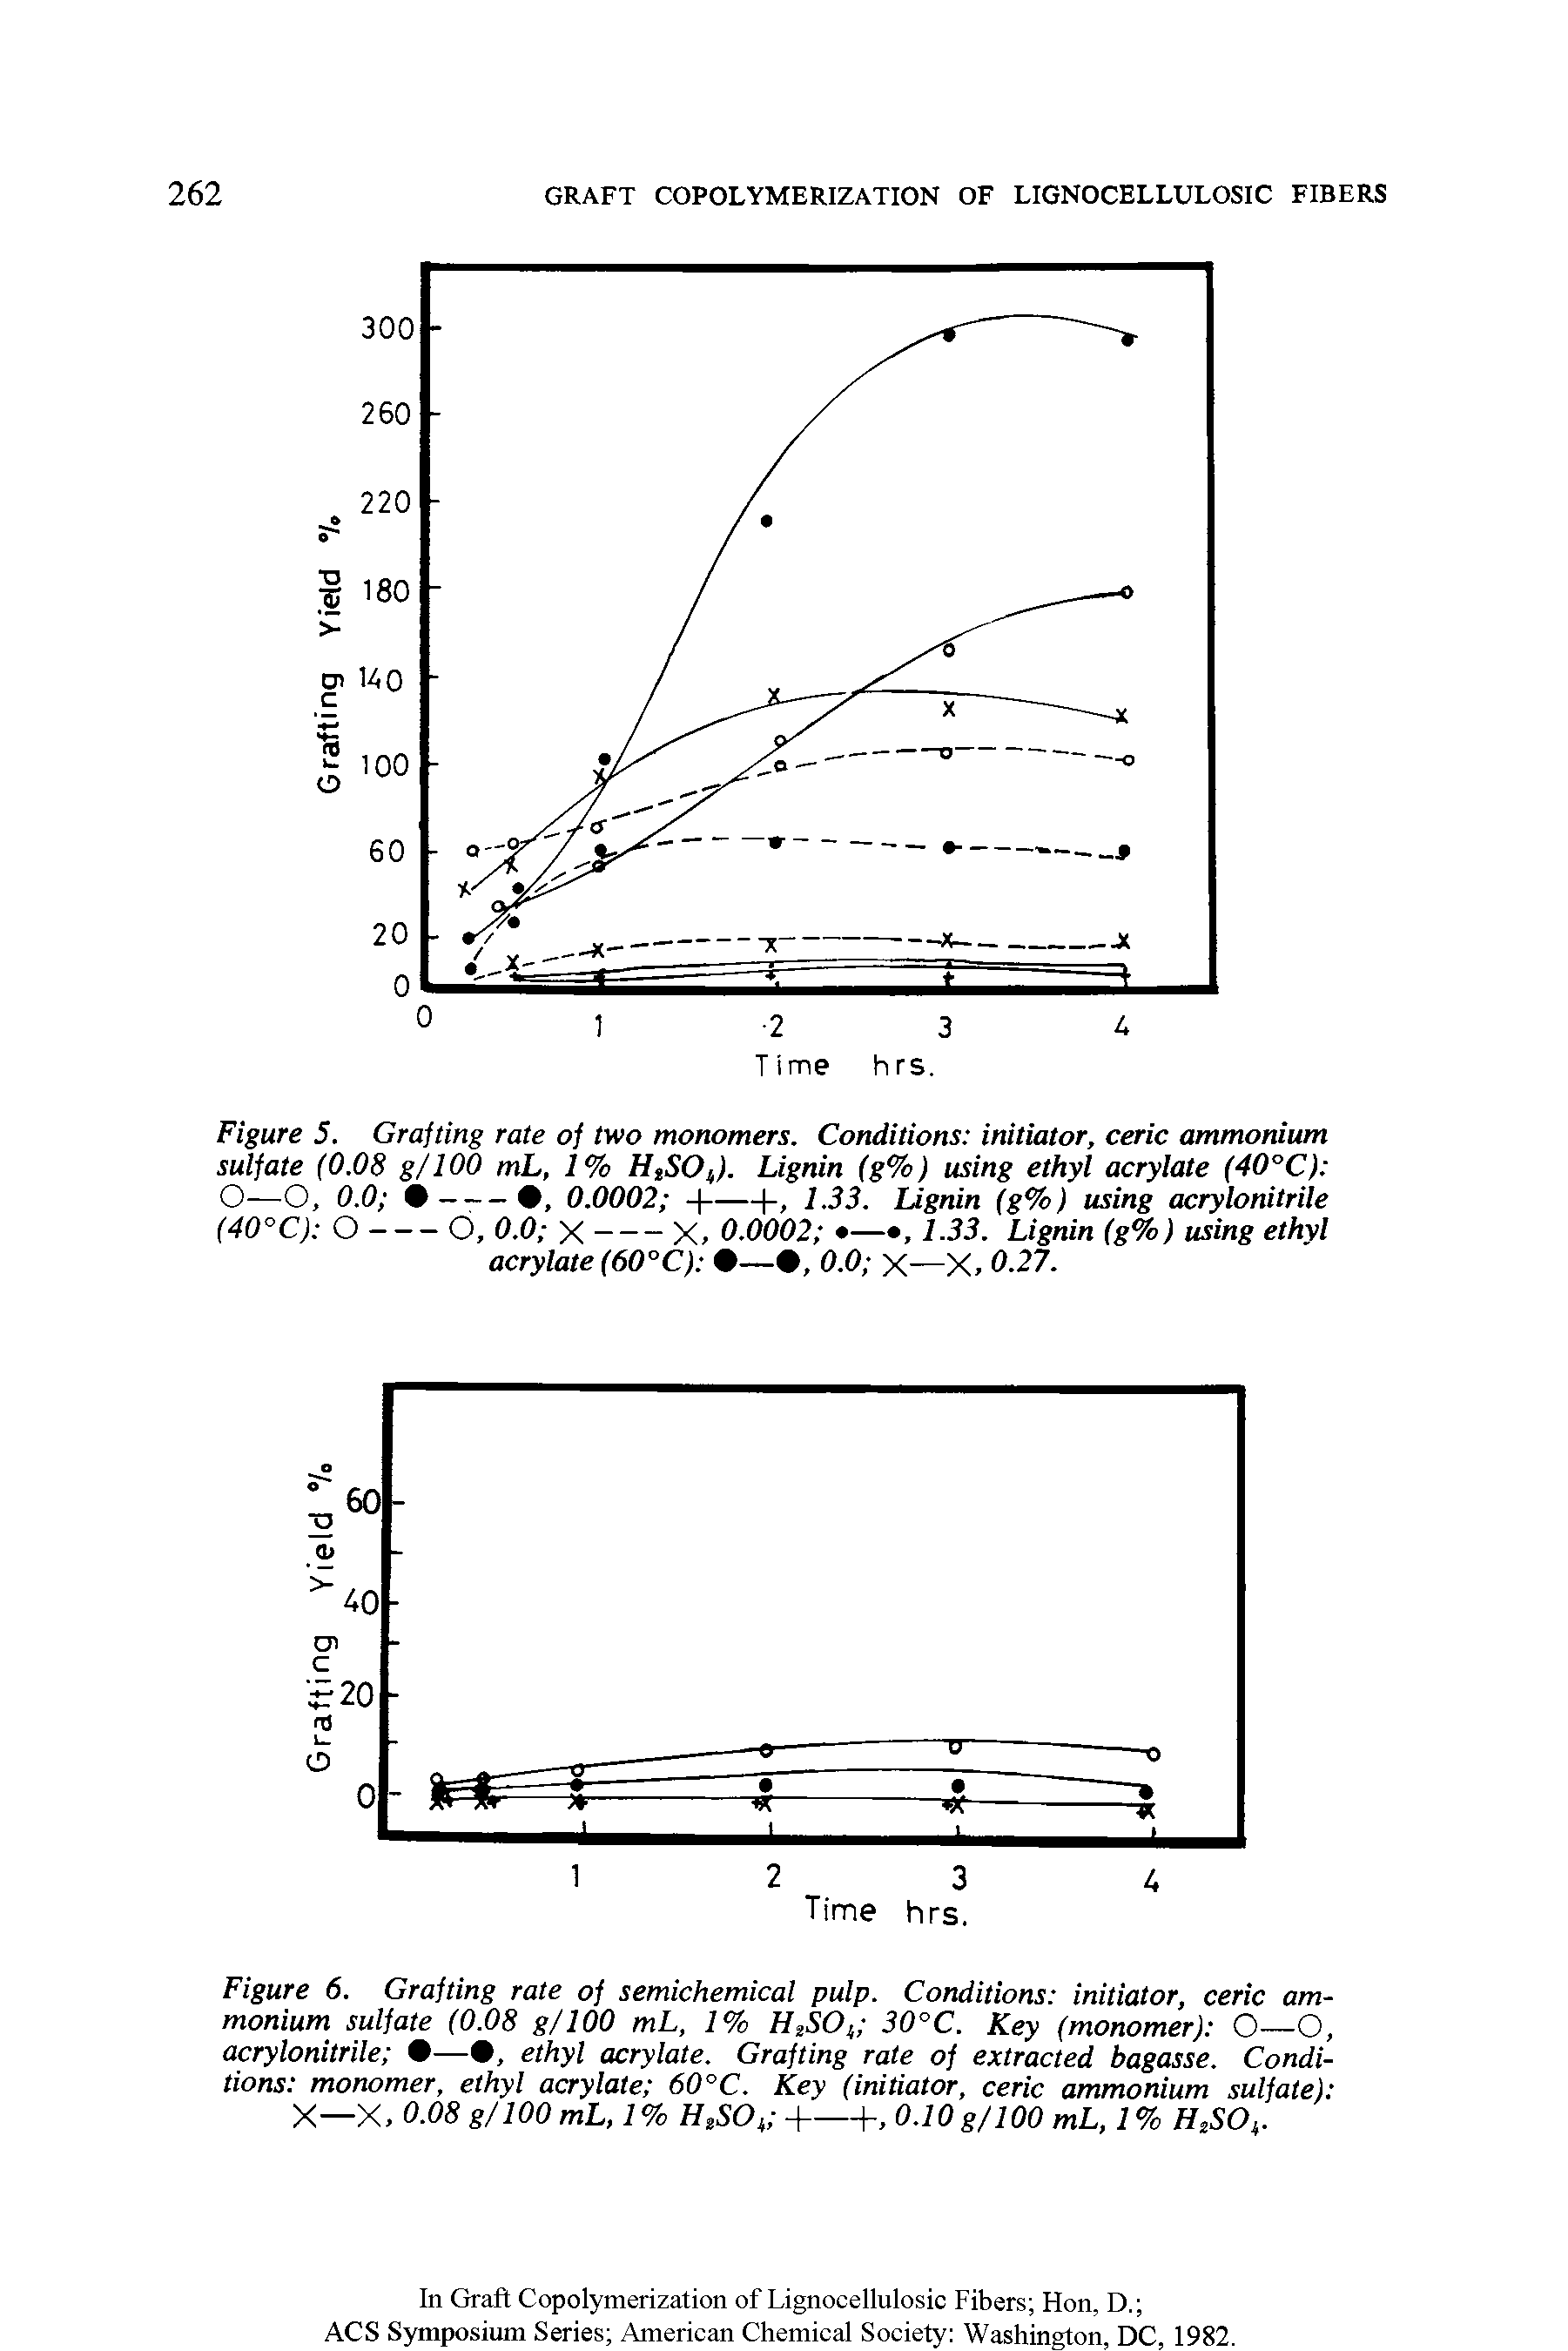 Figure 6. Grafting rate of semichemical pulp. Conditions initiator, ceric ammonium sulfate (0.08 g/100 mL, 1% HsSO 30°C. Key (monomer) O—O, acrylonitrile — , ethyl acrylate. Grafting rate of extracted bagasse. Conditions monomer, ethyl acrylate 60°C. Key (initiator, ceric ammonium sulfate) X—X, 0.08 g/100 mL, 1% H,SOi ----------------------b 0.10 g/100 mL, 1% H2SOt.